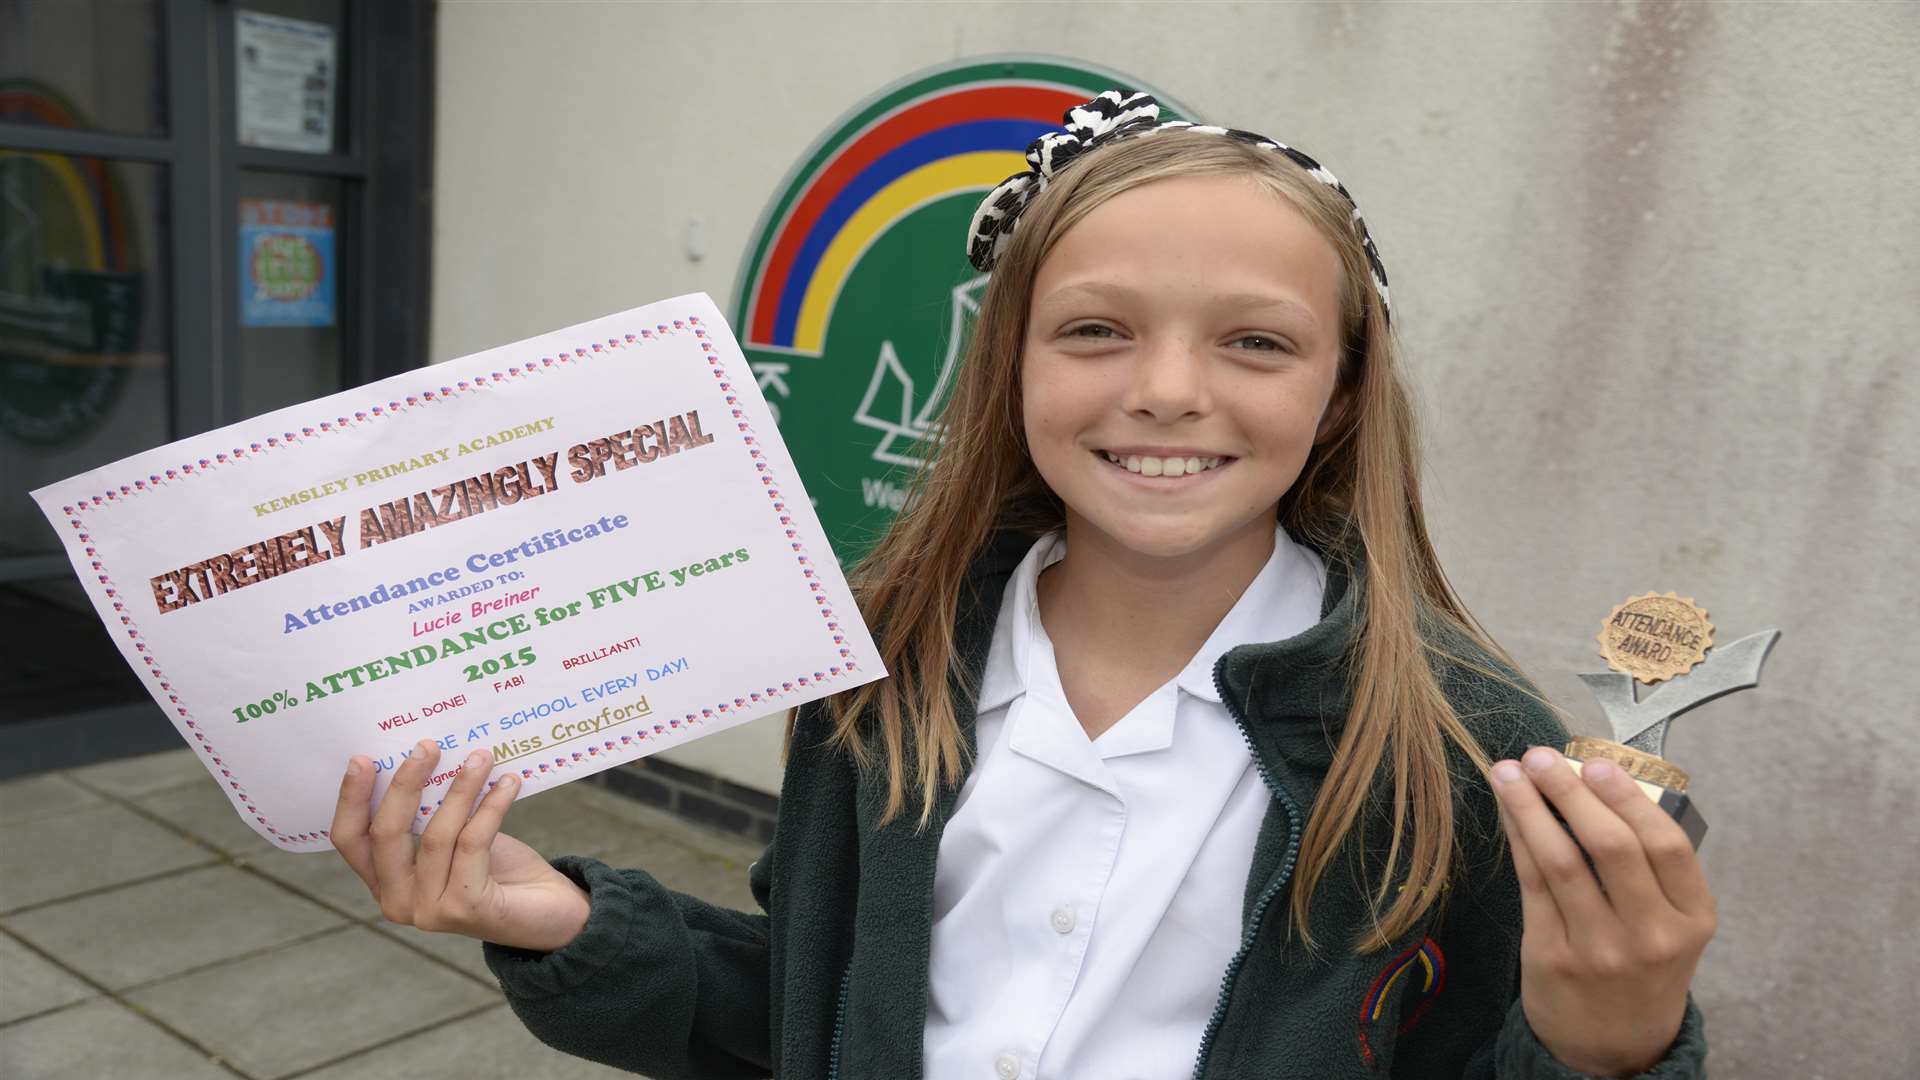 Lucie Breiner who has achieved 100% attendance for five years at Kemsley Primary Academy